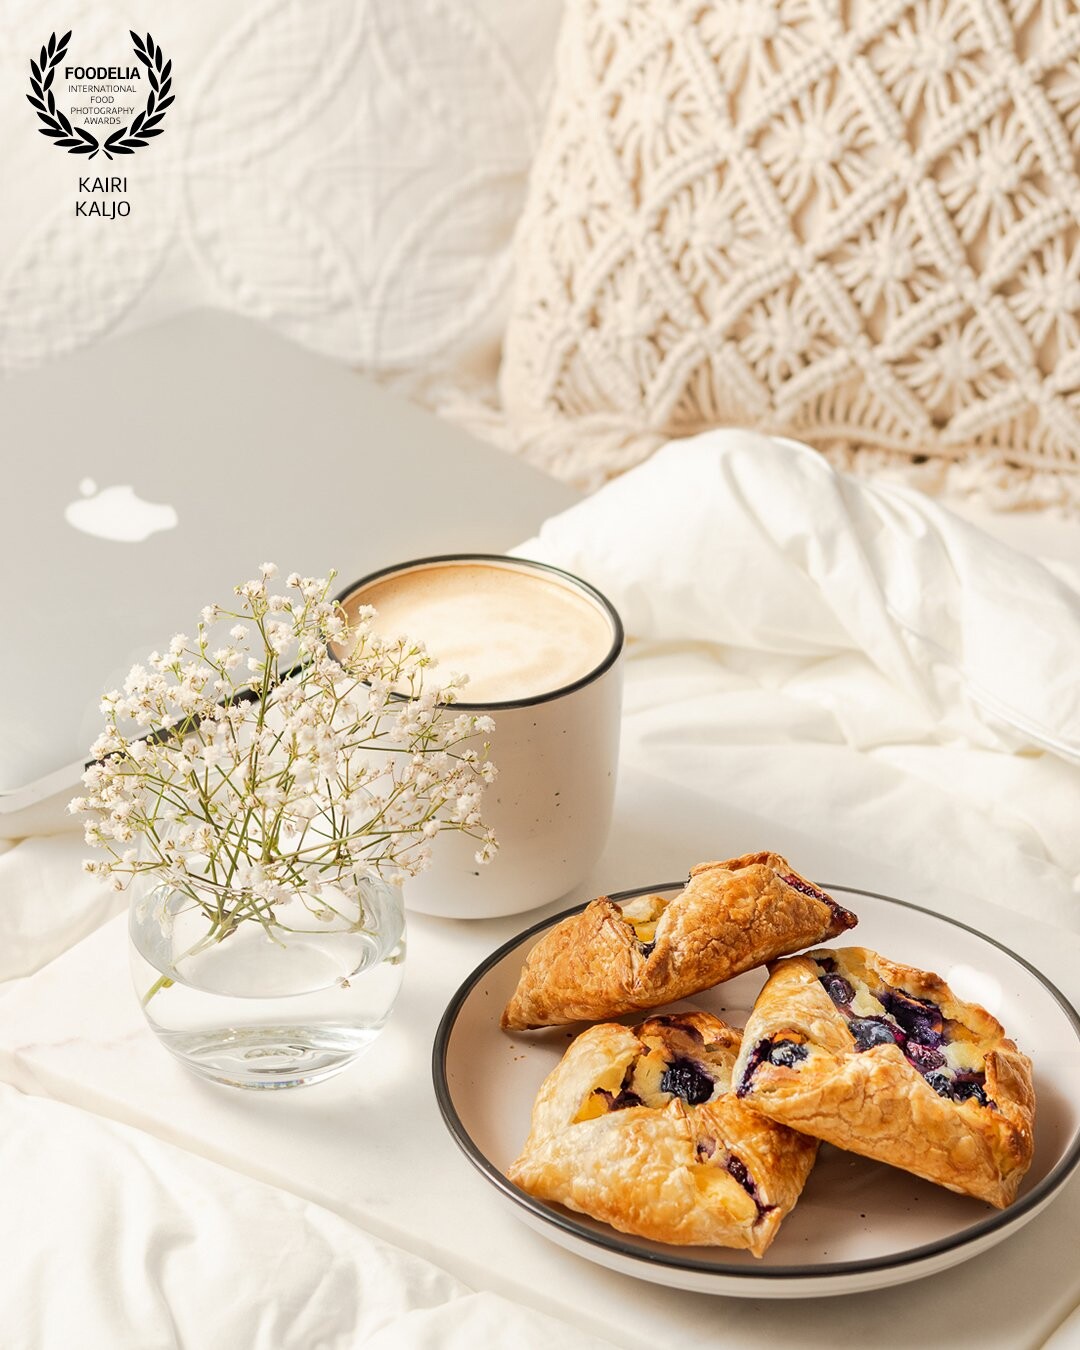 I love breakfasts at weekend. Slow mornings, no rush anywhere and certainly  a coffee in bed. Even better when it comes with freshly baked pastries.